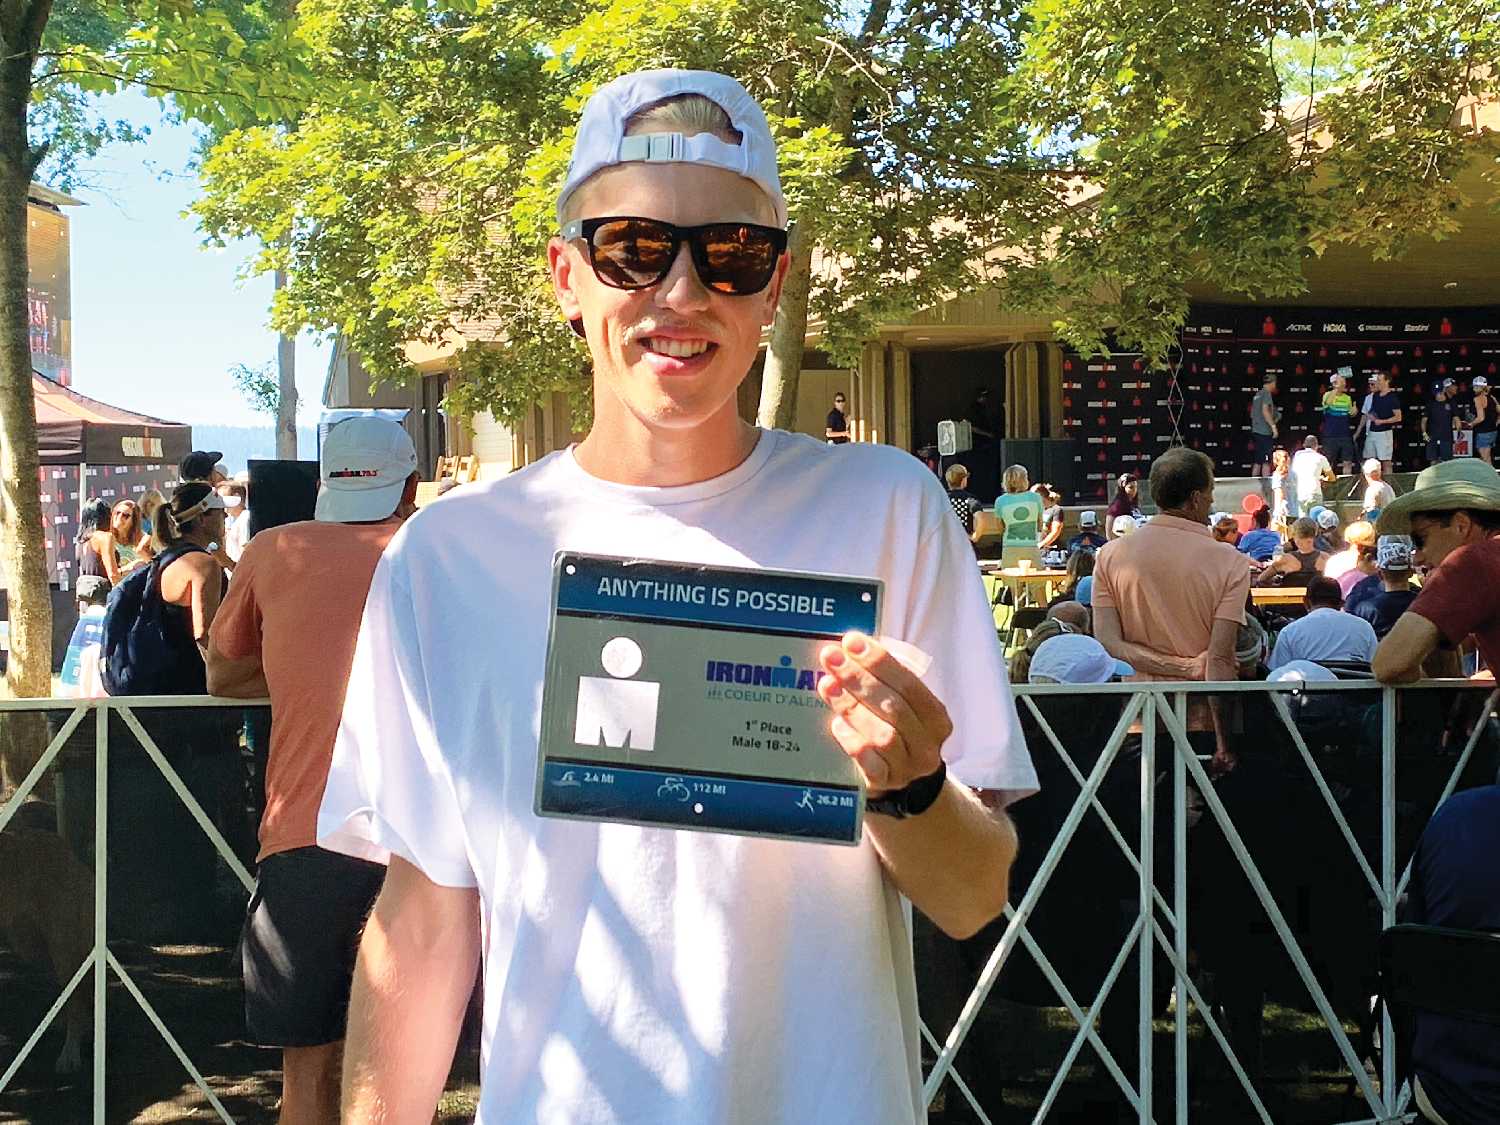 Jameson Plewes with a plaque for his first place finish at a half Iron Man race in Coeur dAlene, Idaho this year.